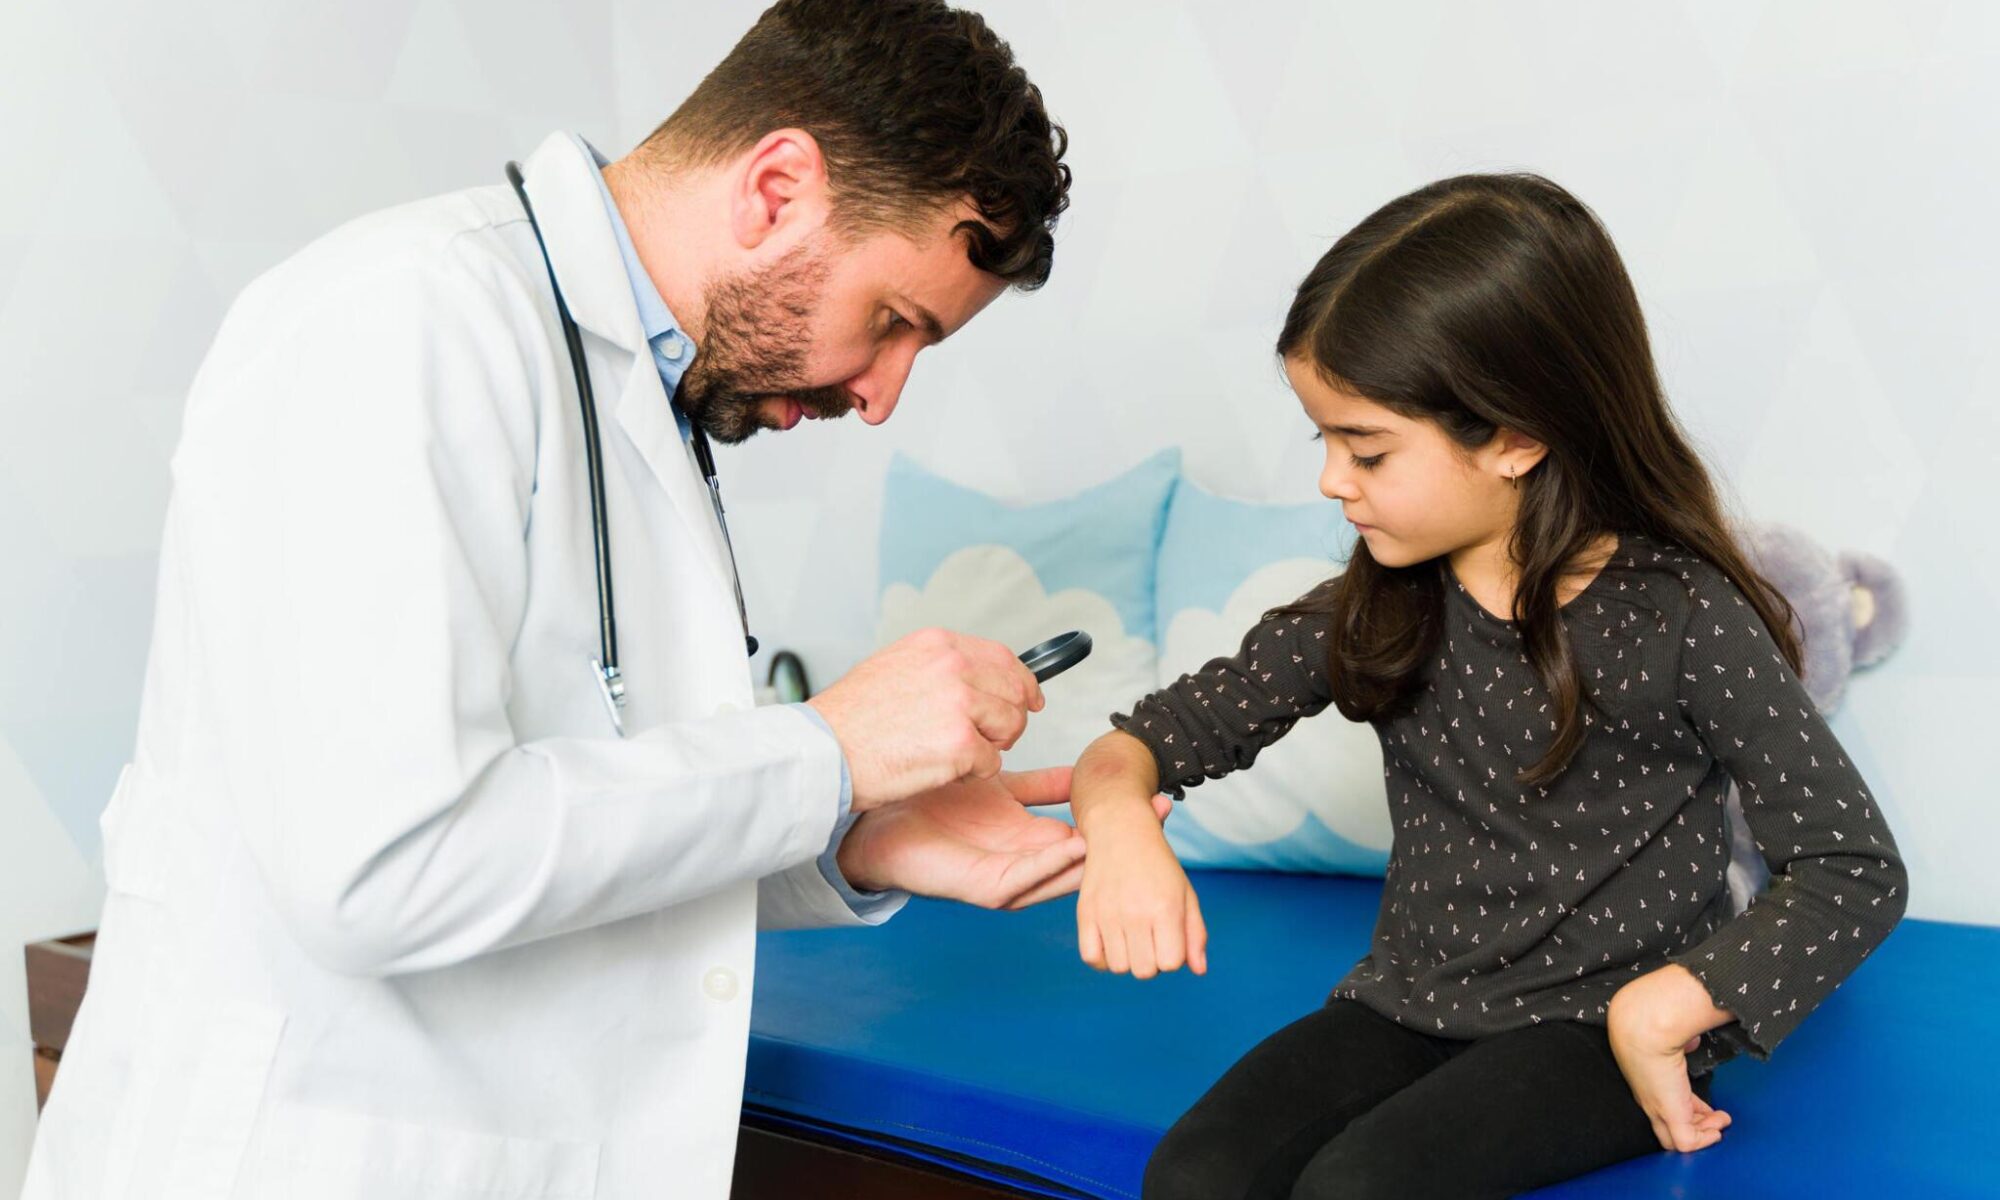 Switching to a Primary Care Doctor: At What Age Do You Stop Going to a Pediatrician?